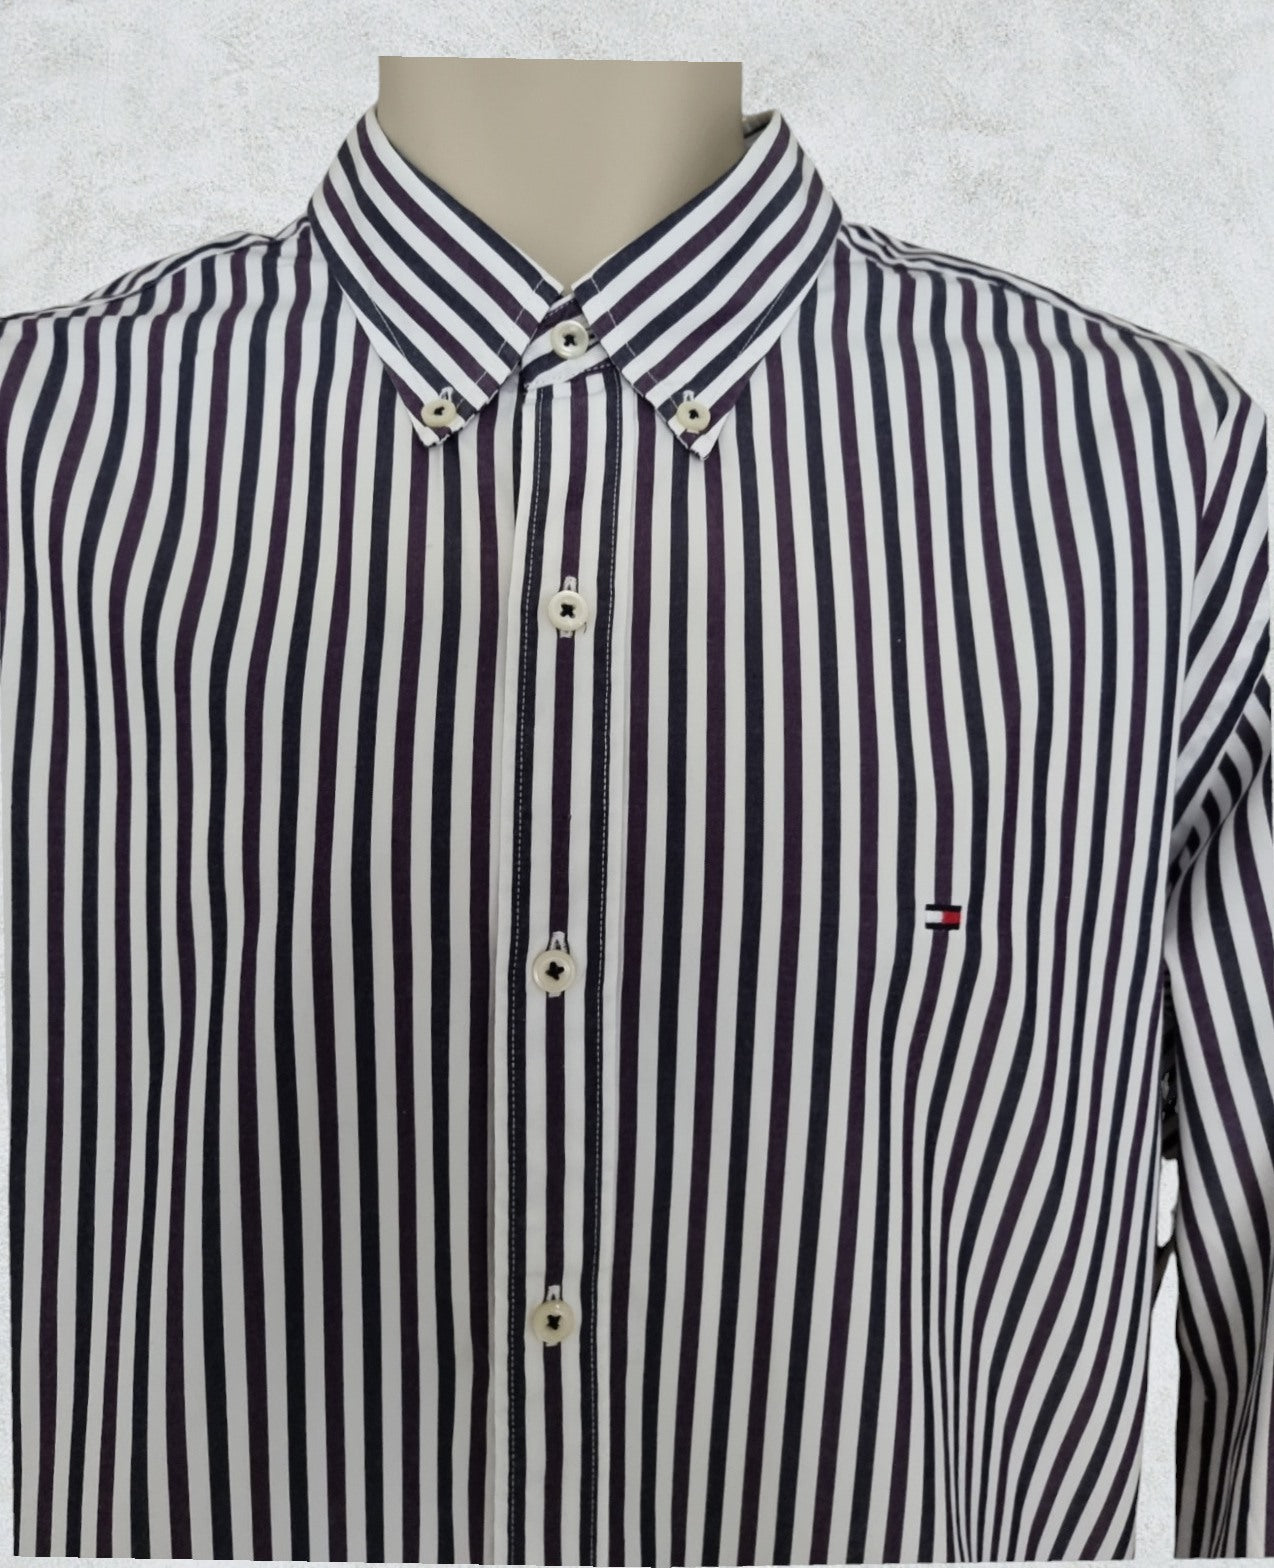 Tommy Hilfiger Mens Navy, Purple and White Stripe Long Sleeve Shirt UK L Timeless Fashions